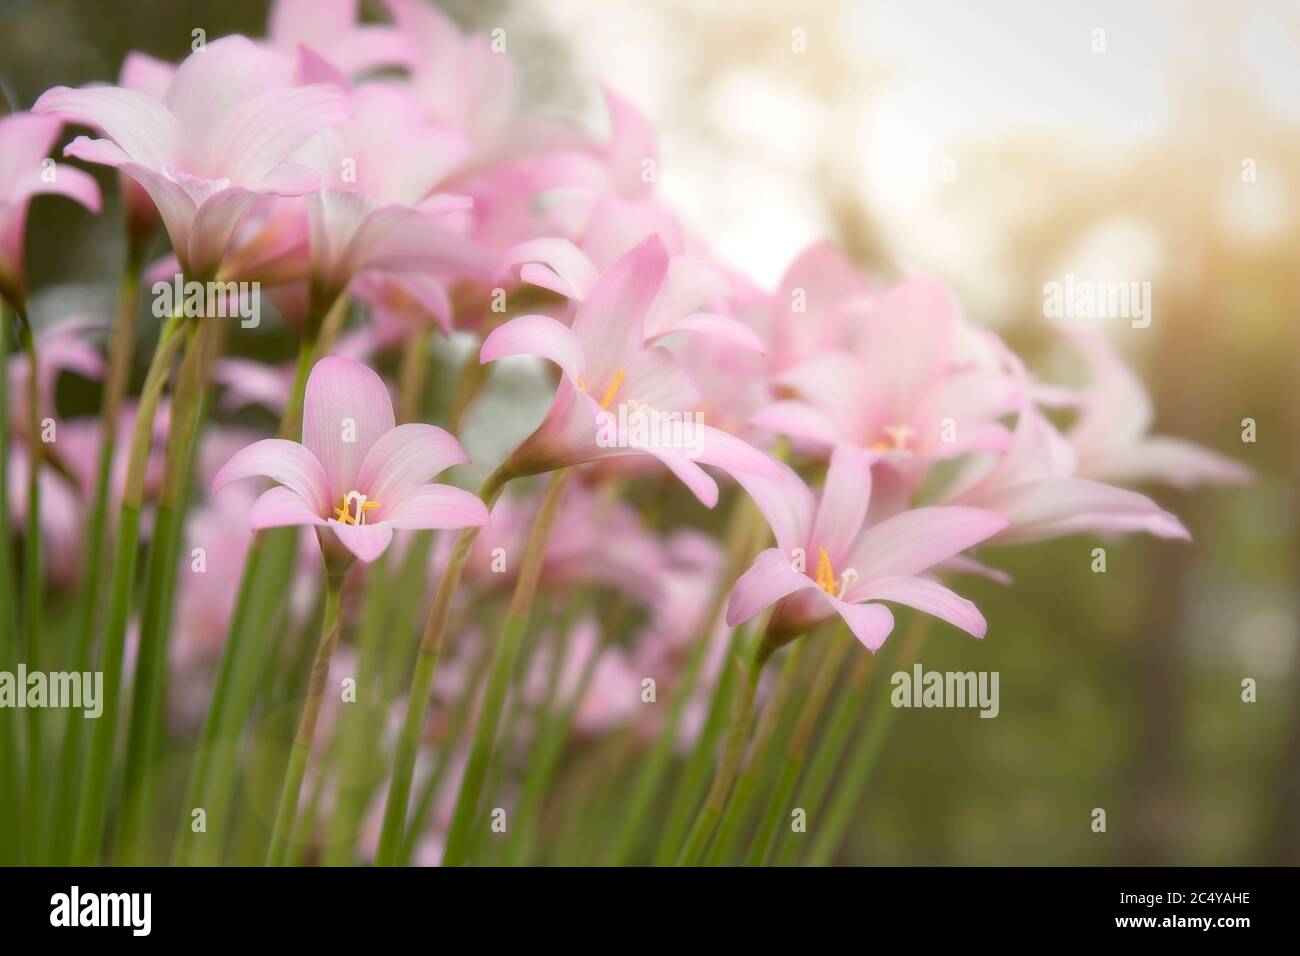 Blooming pink rain lilies in the garden Stock Photo